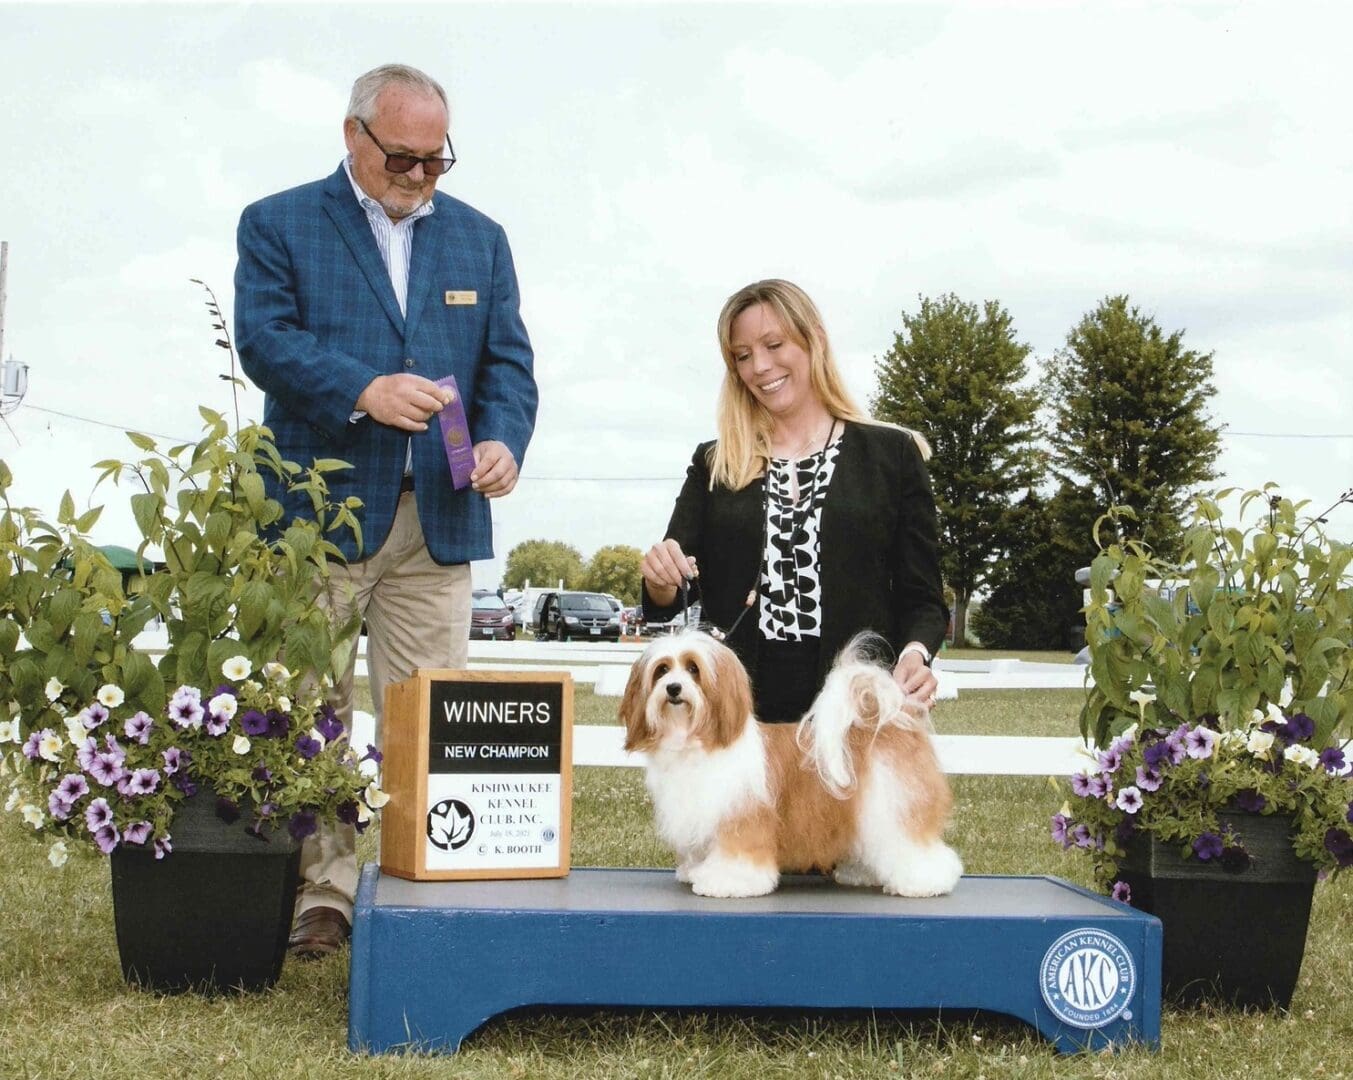 A man and woman standing next to a AKC champion Havanese at a dog show.